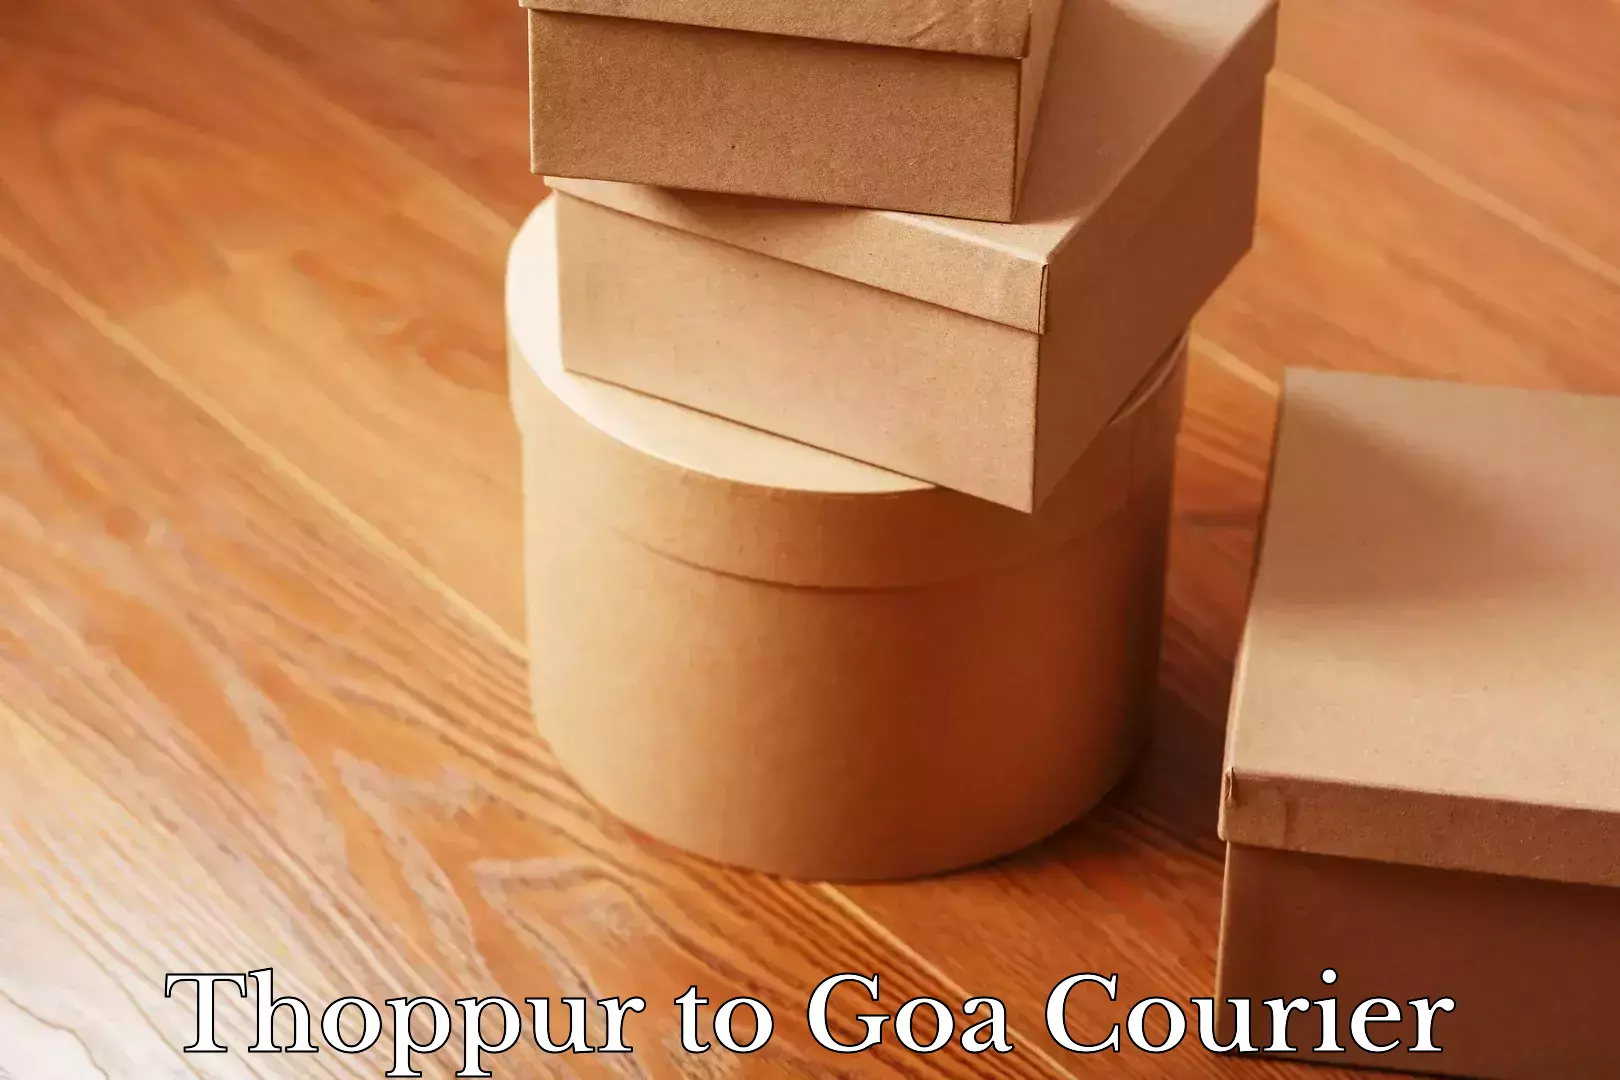 Parcel service for businesses Thoppur to Goa